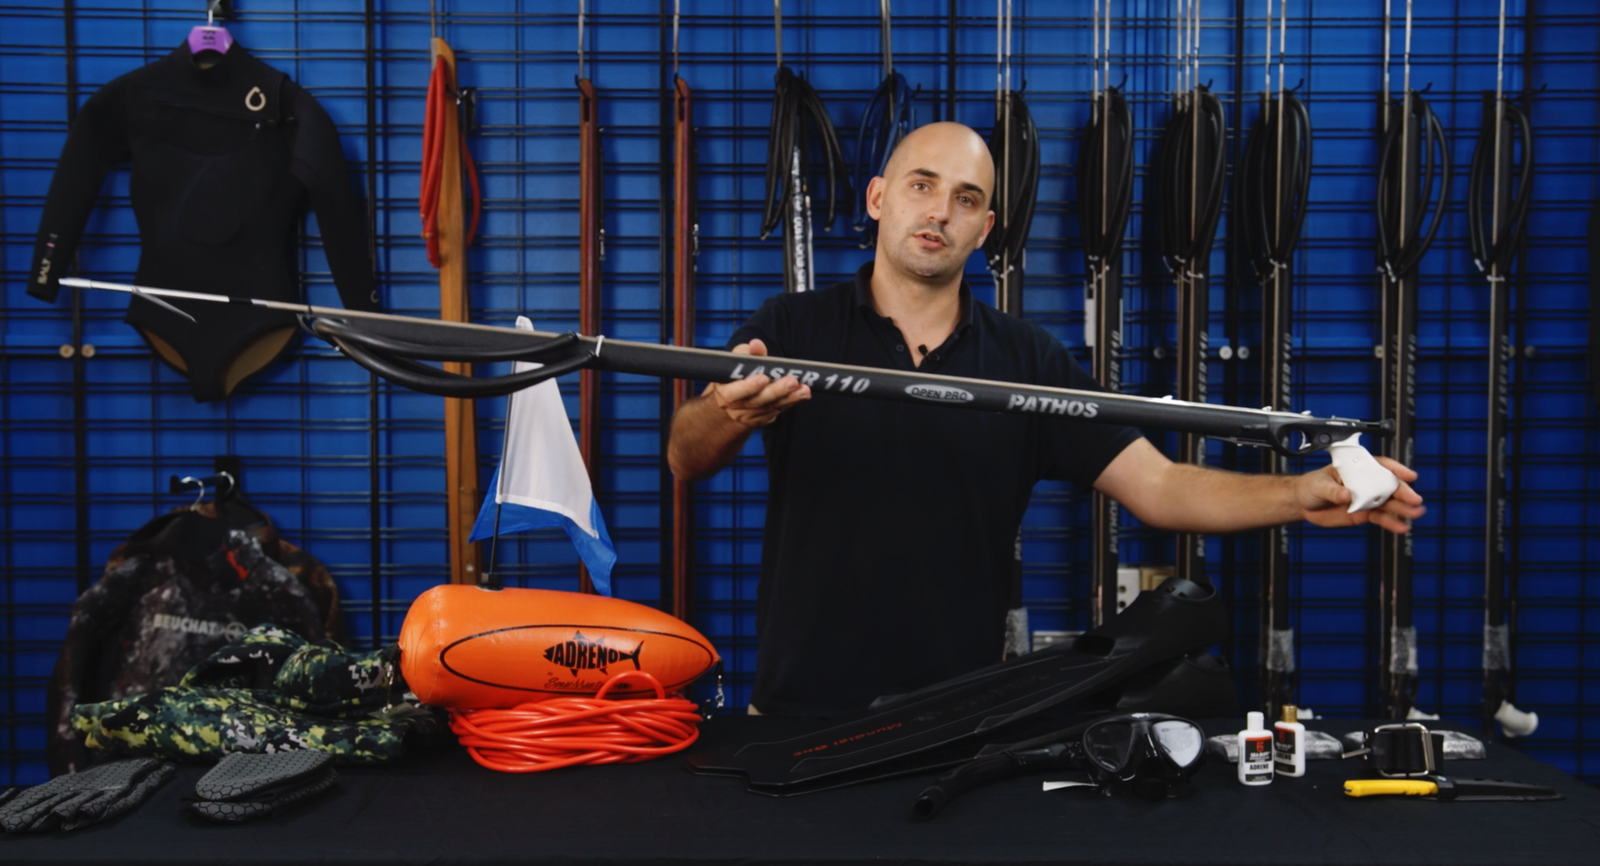 Beginner Spearfishing Gear - What You Need To Get Started - Adreno